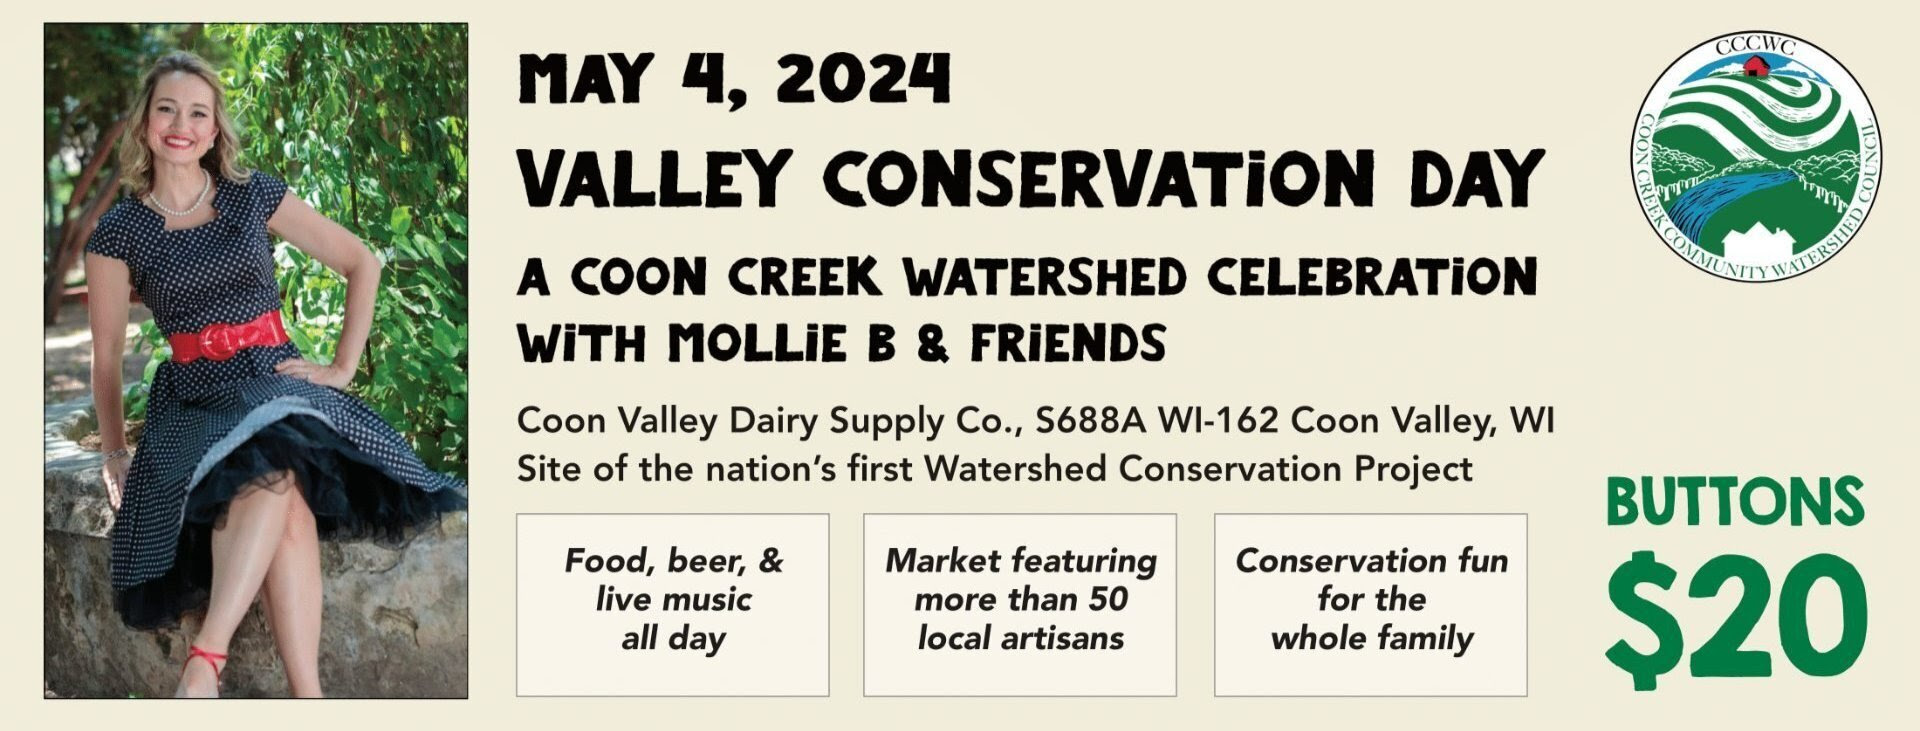 💧Coon Creek Watershed to Celebrate Water, Conservation, and Community During Valley Conservation Day